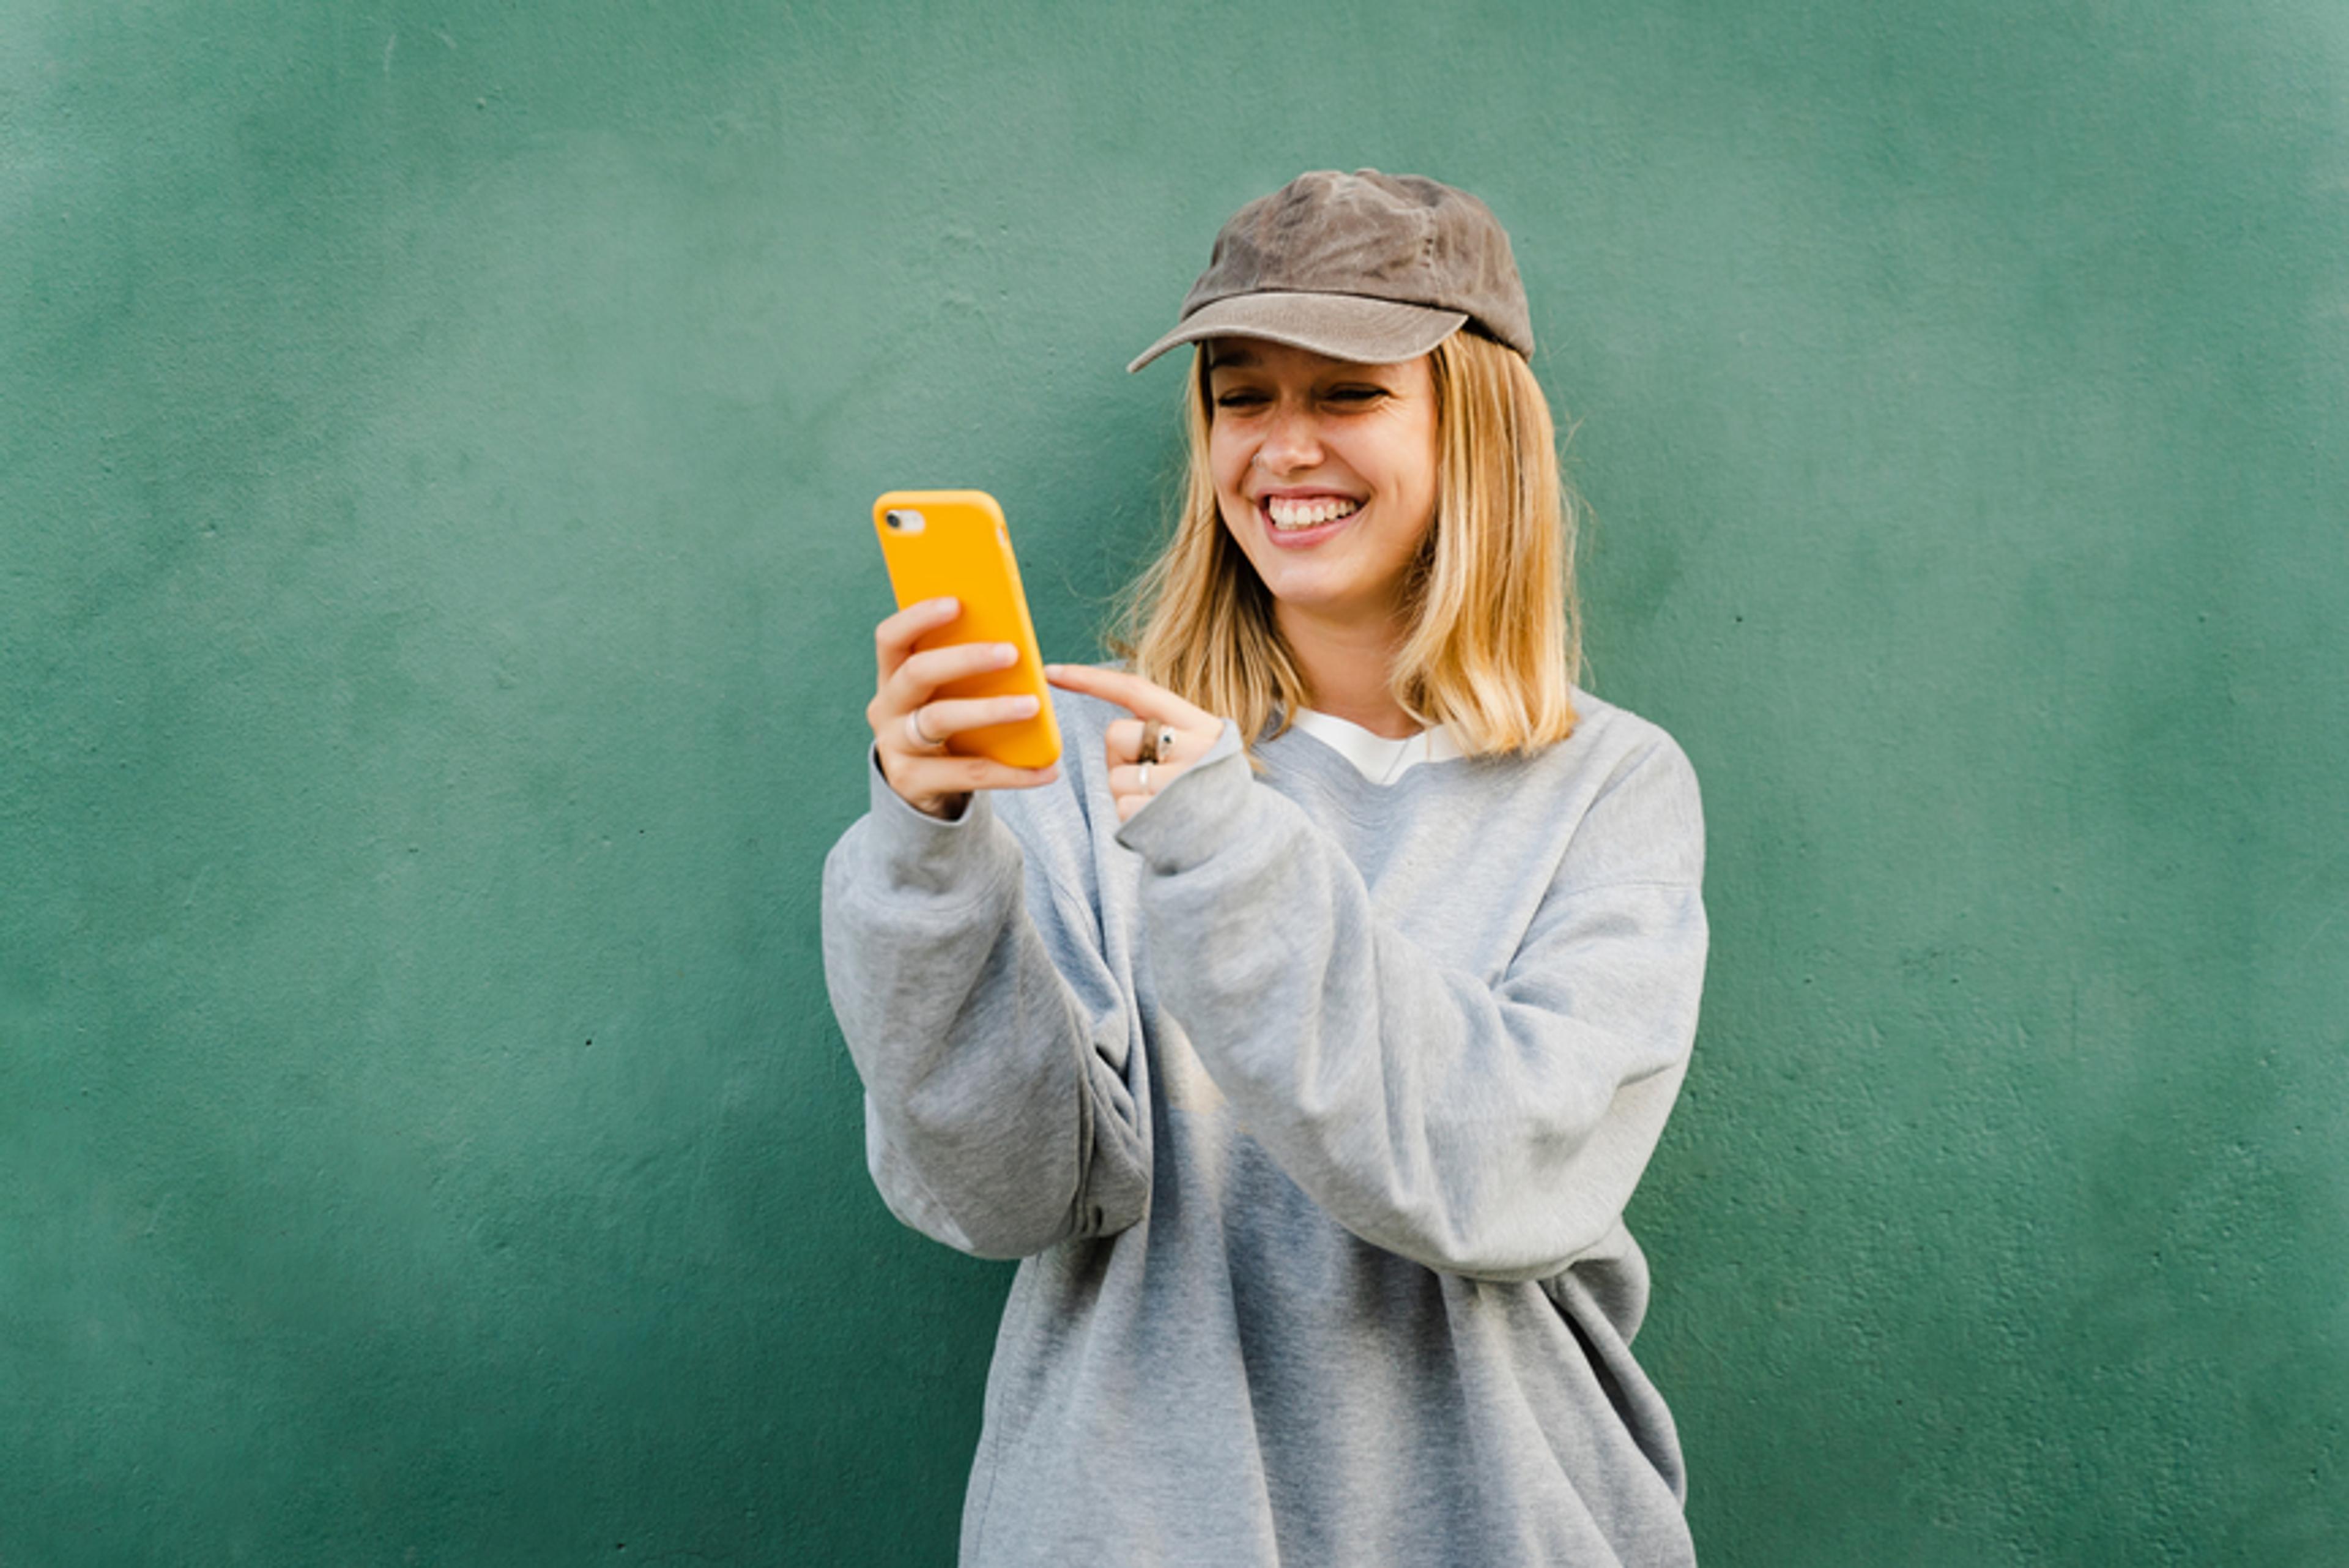 A photo of a woman smiling while looking at a phone